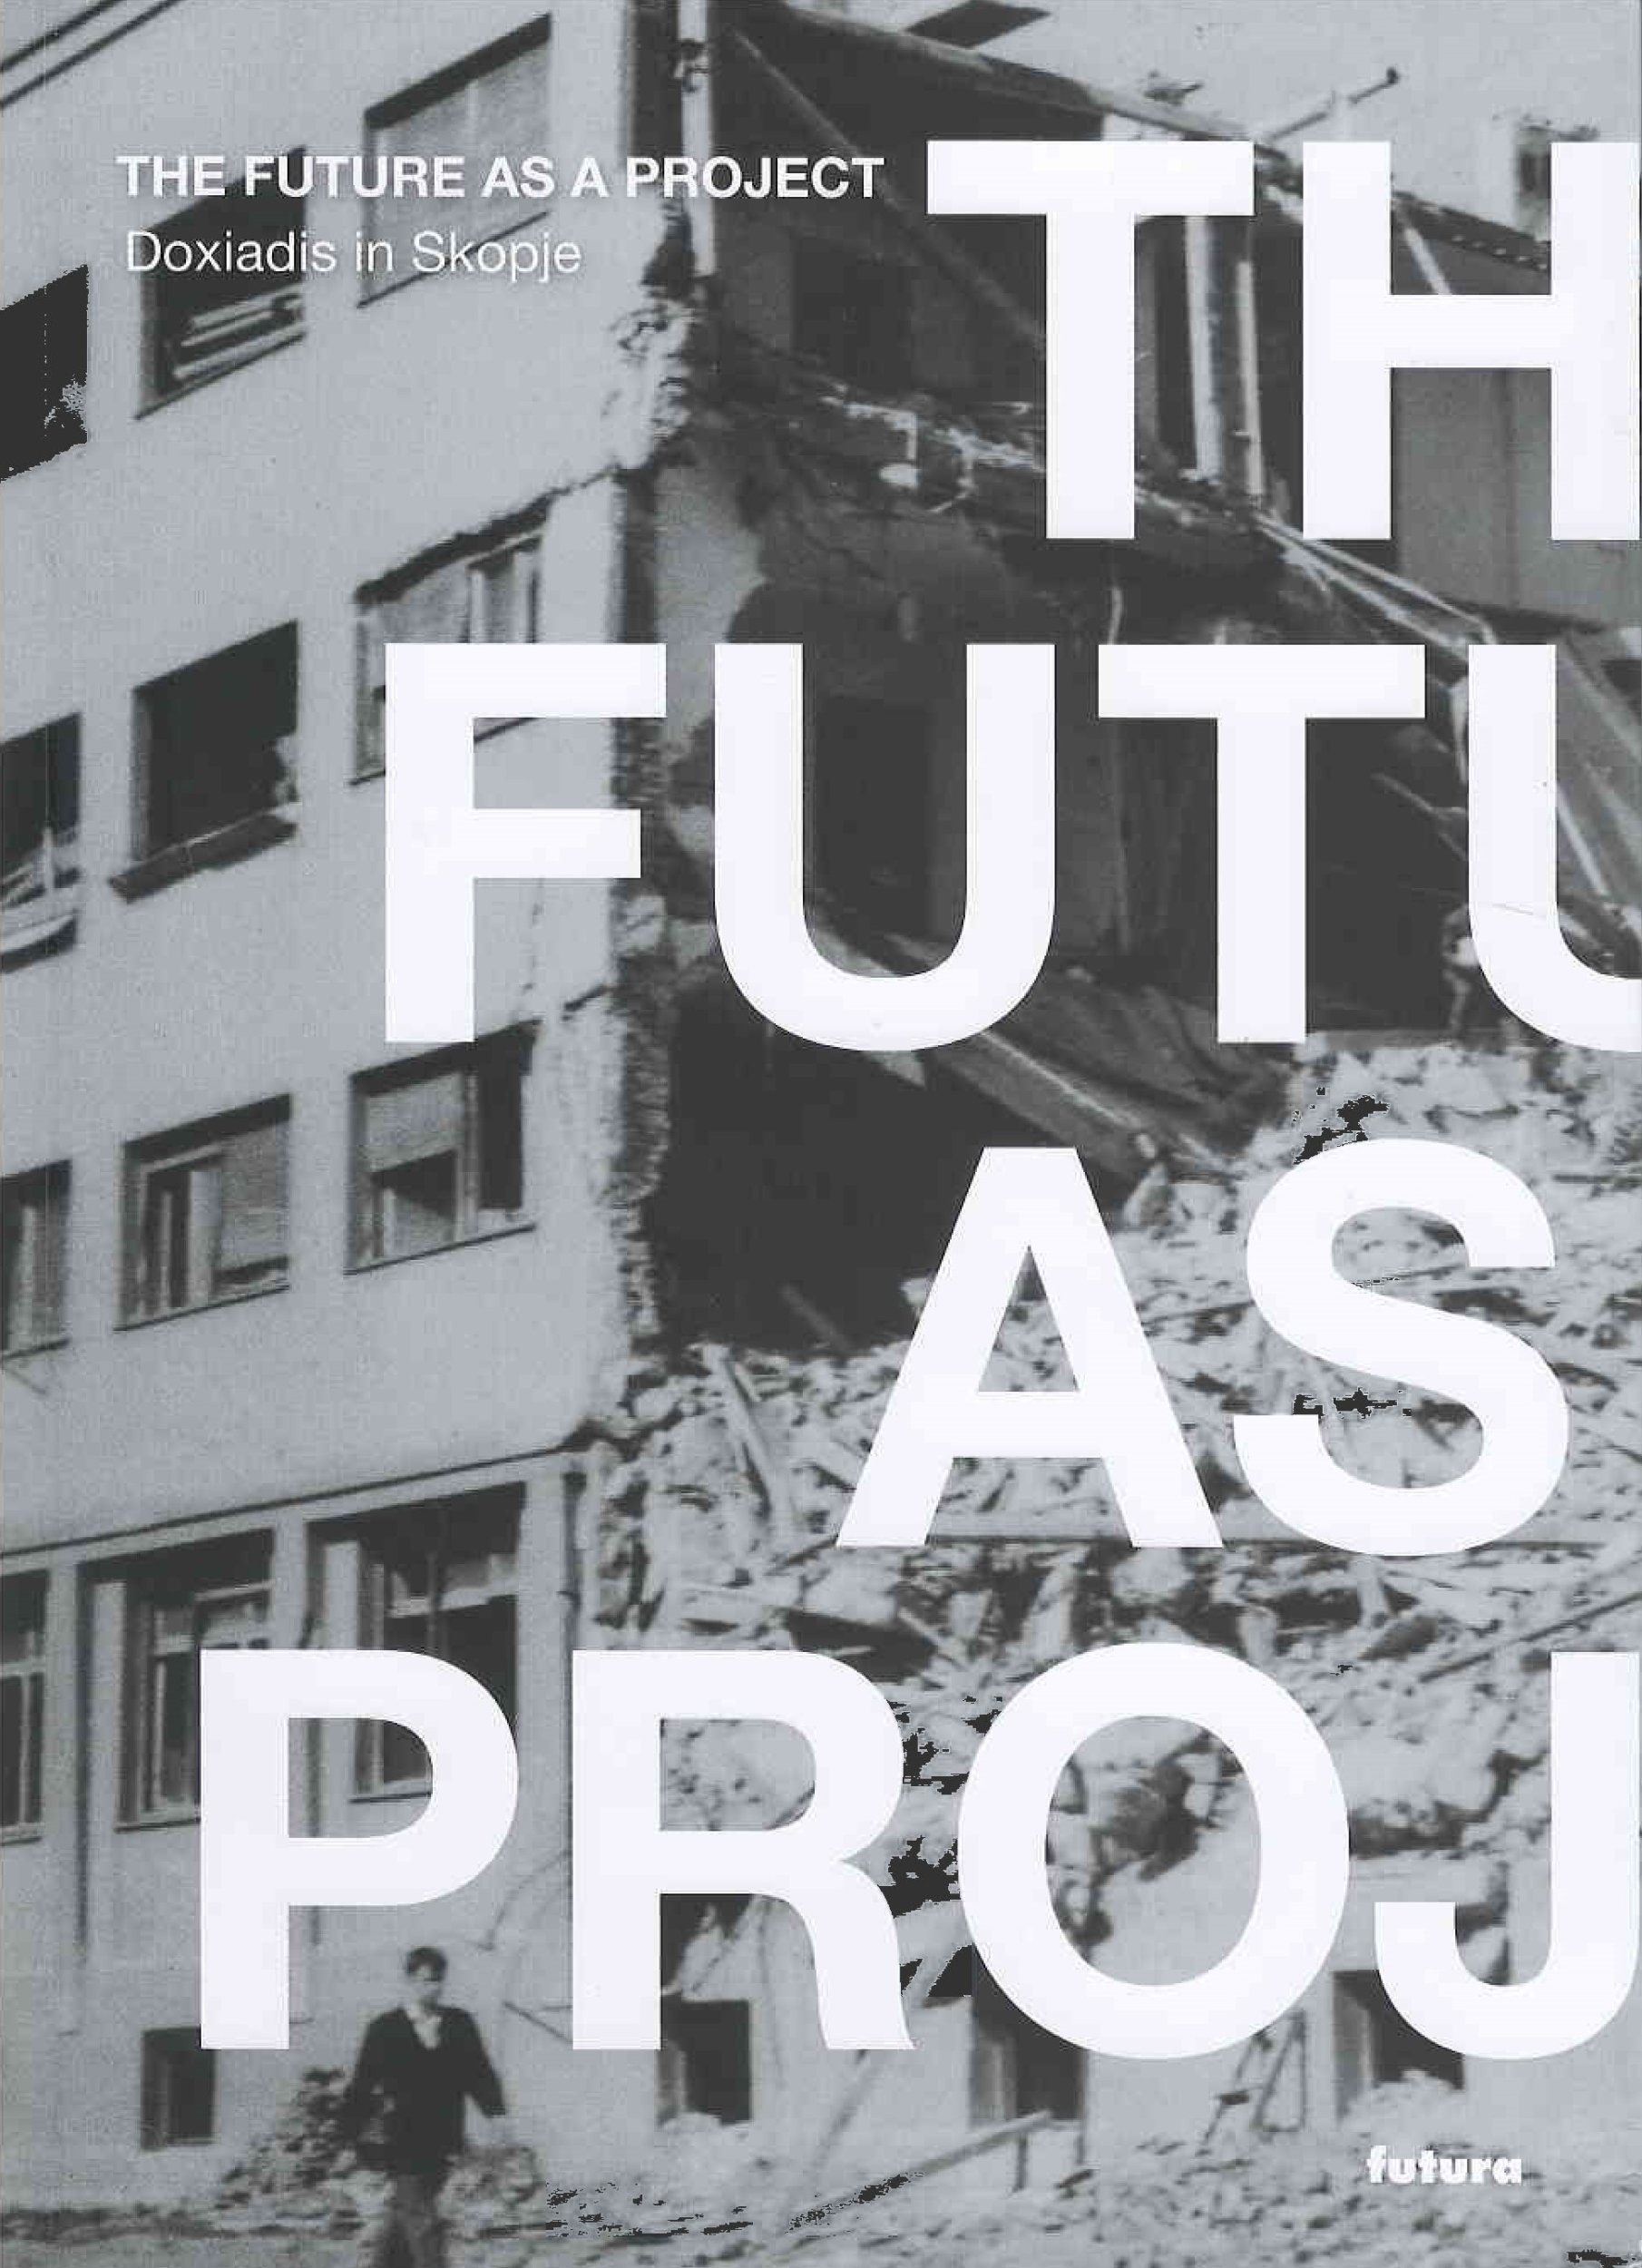 The future as a project : Doxiadis in Skopje